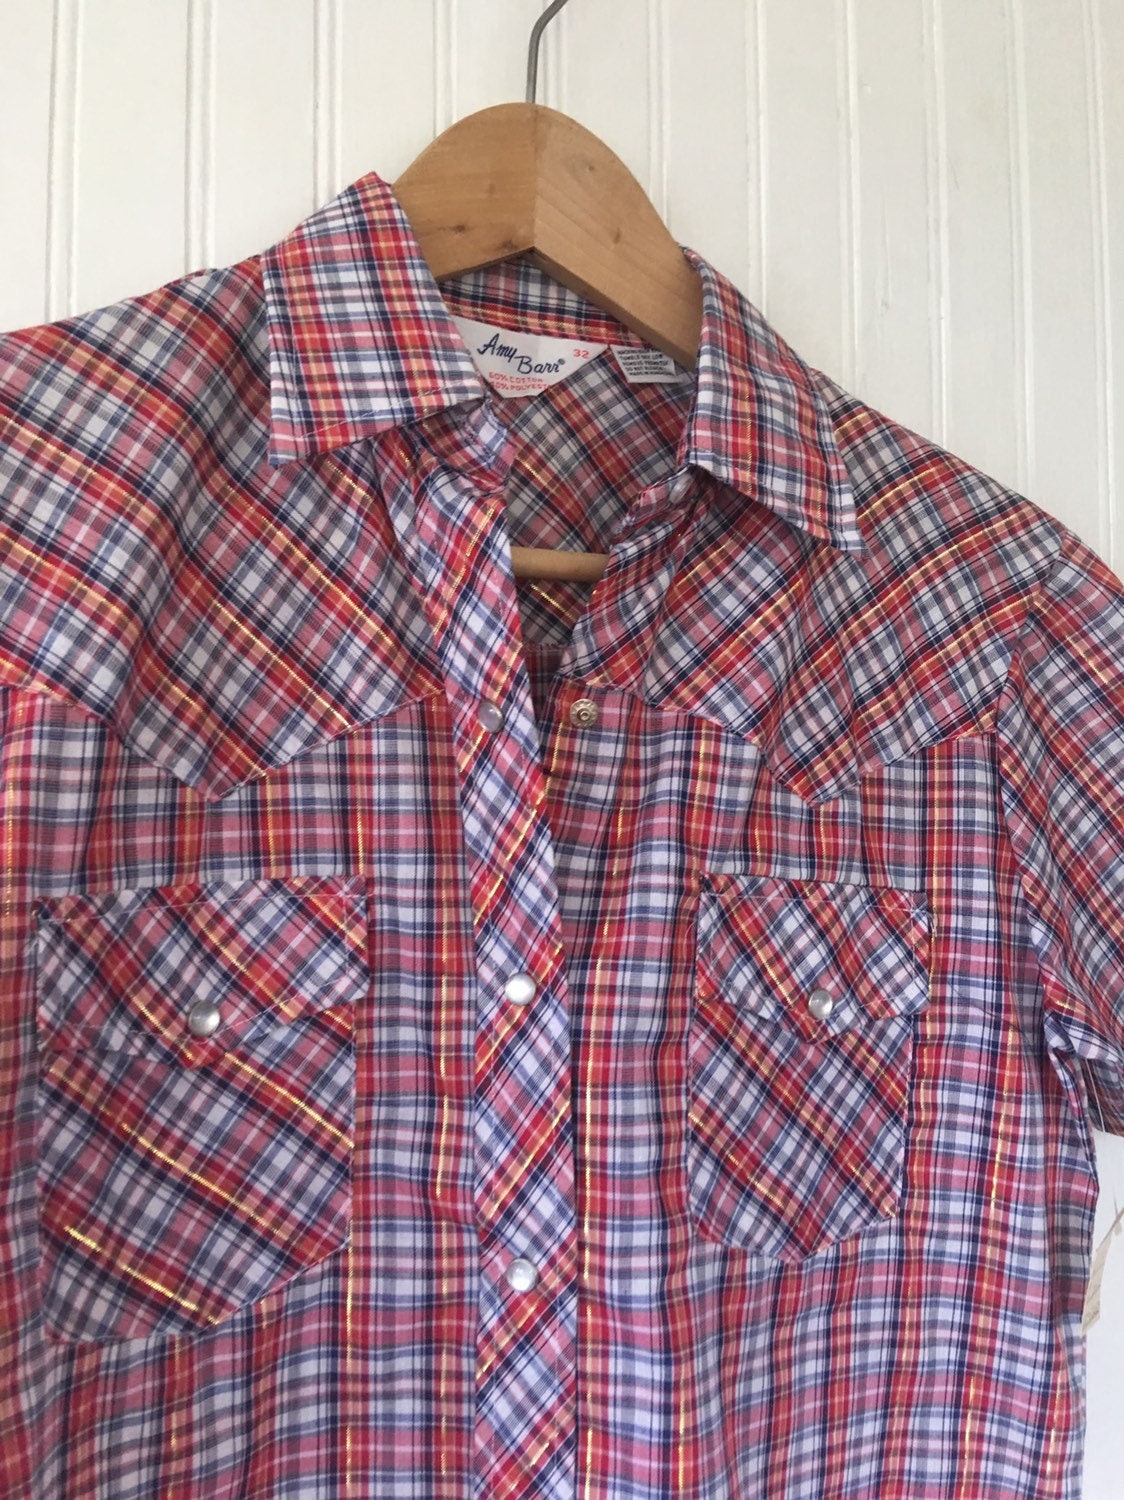 NWT Vintage Plaid Short Sleeve Top Size Small / Medium - White Red Blue ...